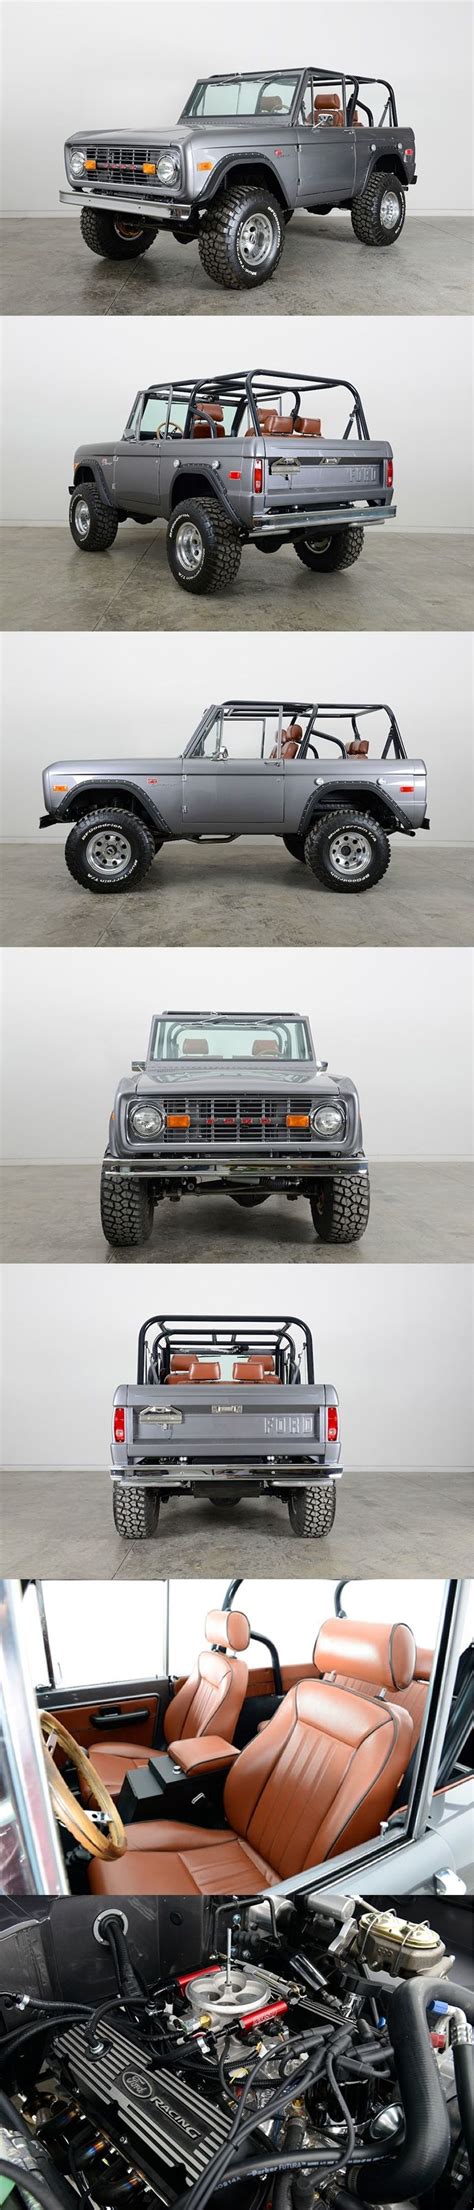 17 Best Images About Bronco Ideas And Colors On Pinterest Classic